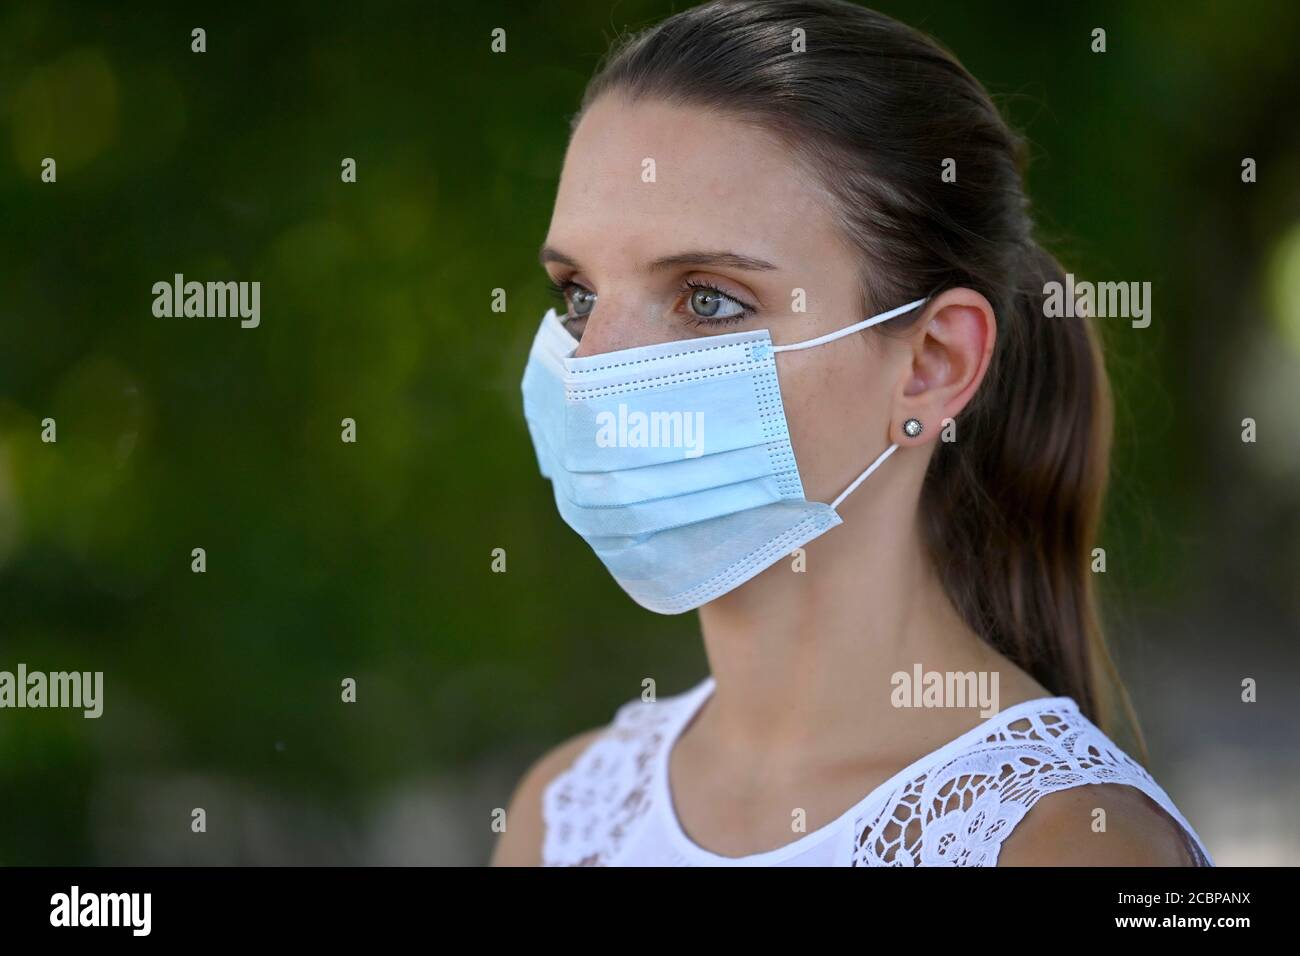 Woman wears mouth mask correctly over nose and mouth, portrait, corona crisis, Germany Stock Photo